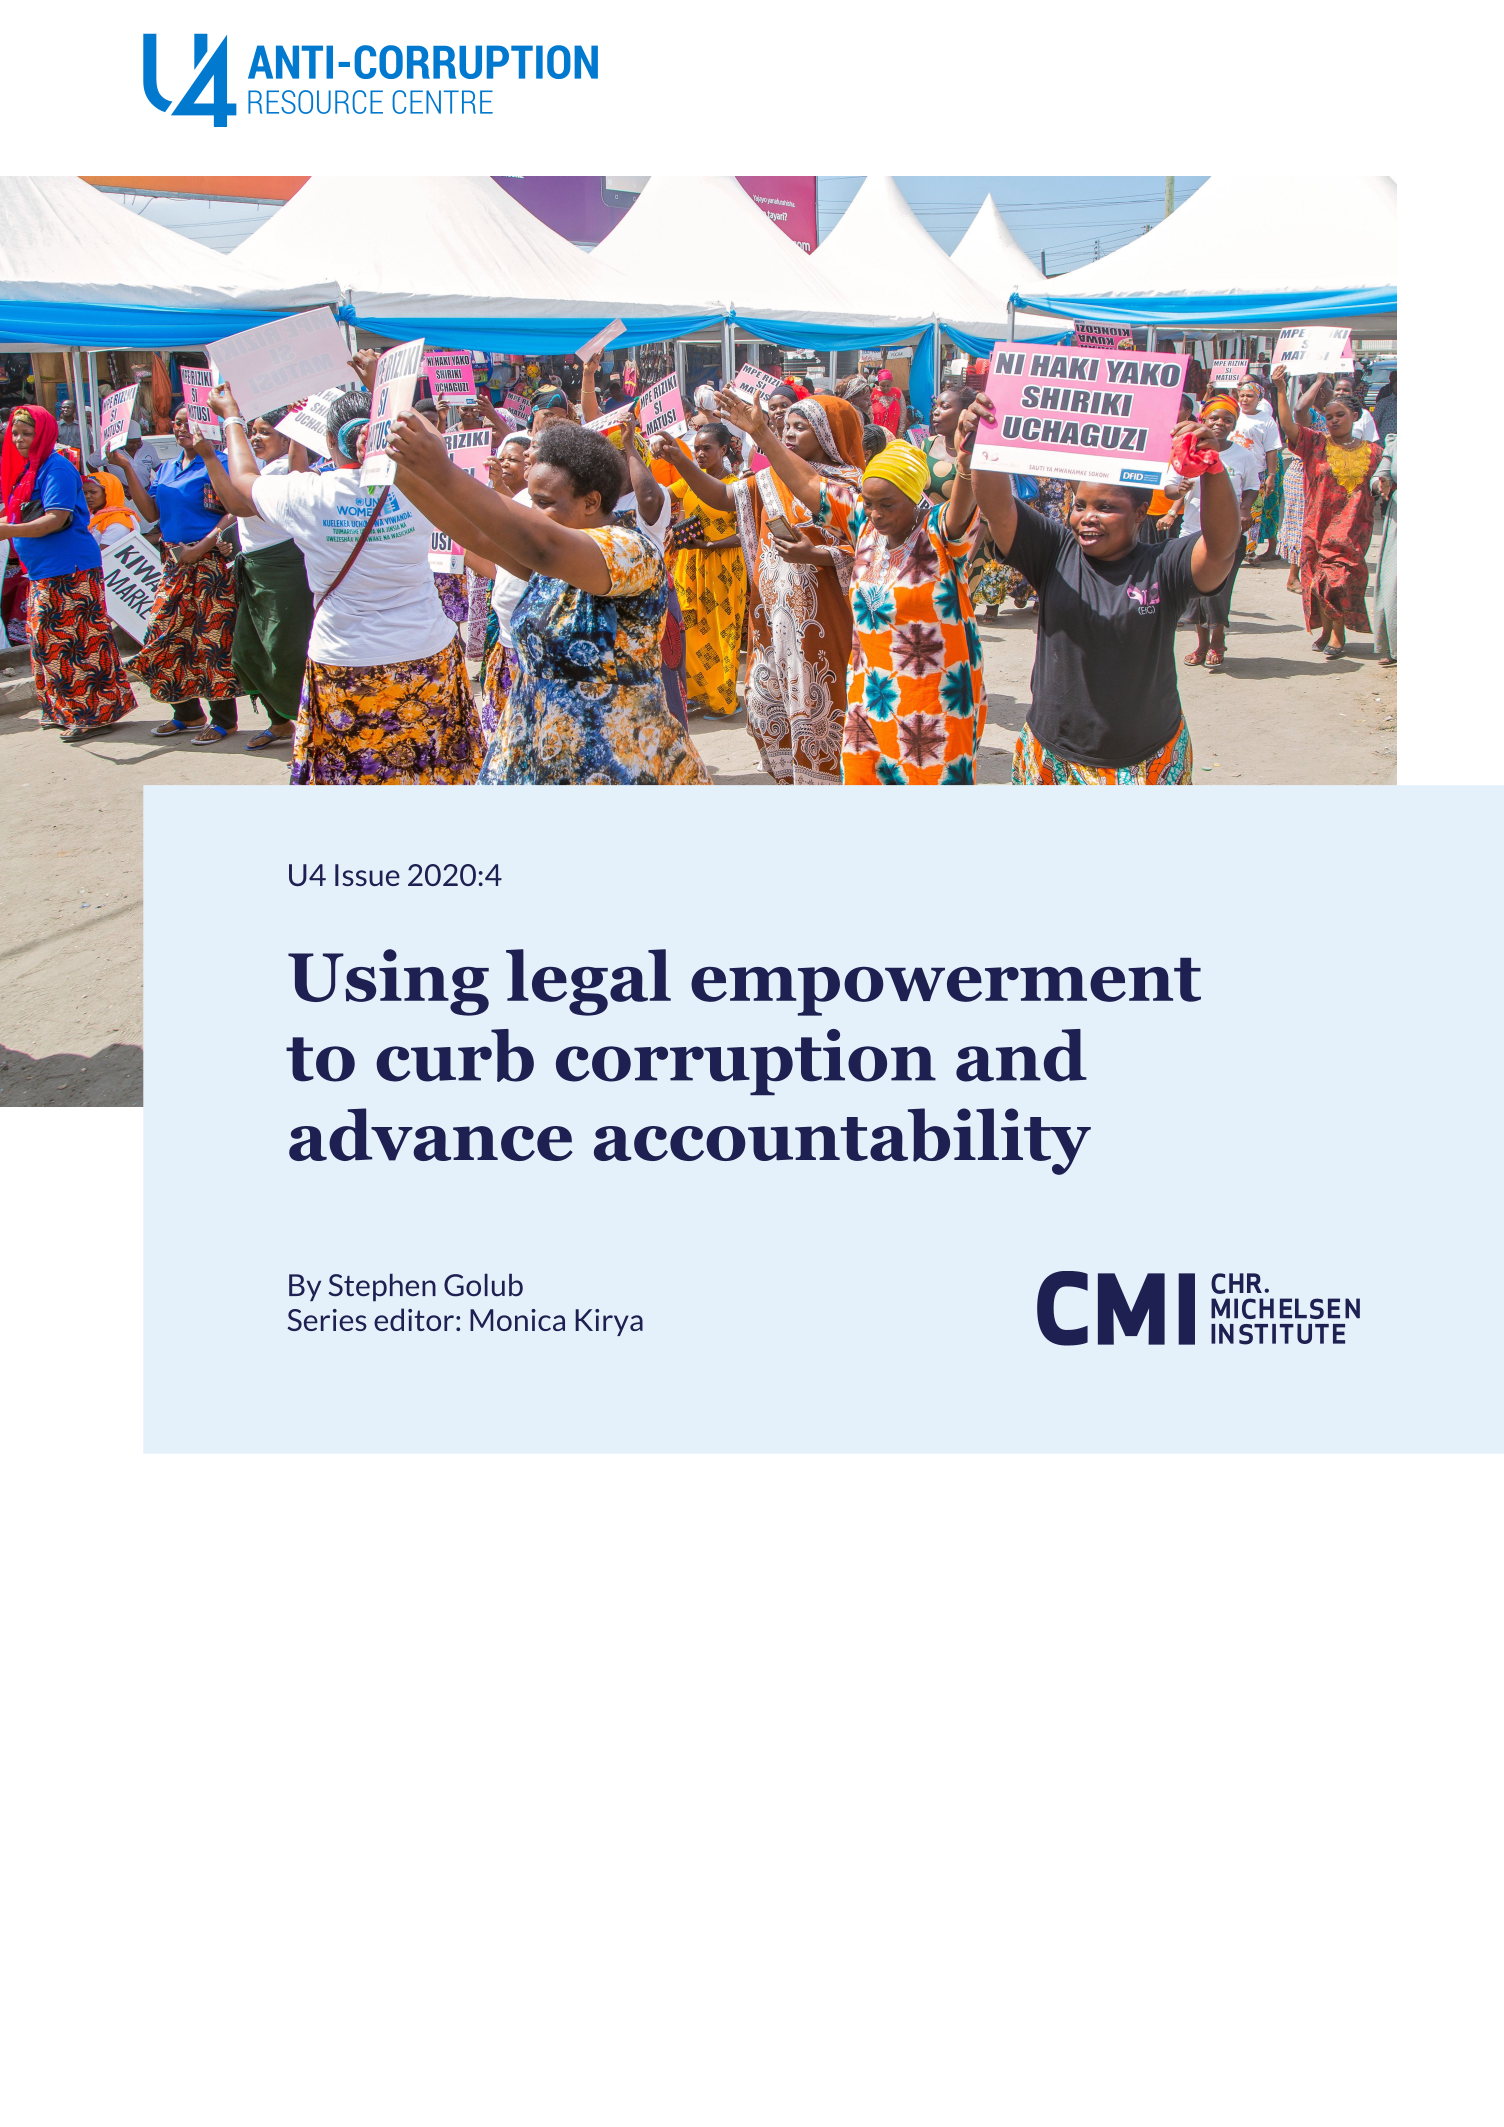 Using legal empowerment to curb corruption and advance accountability